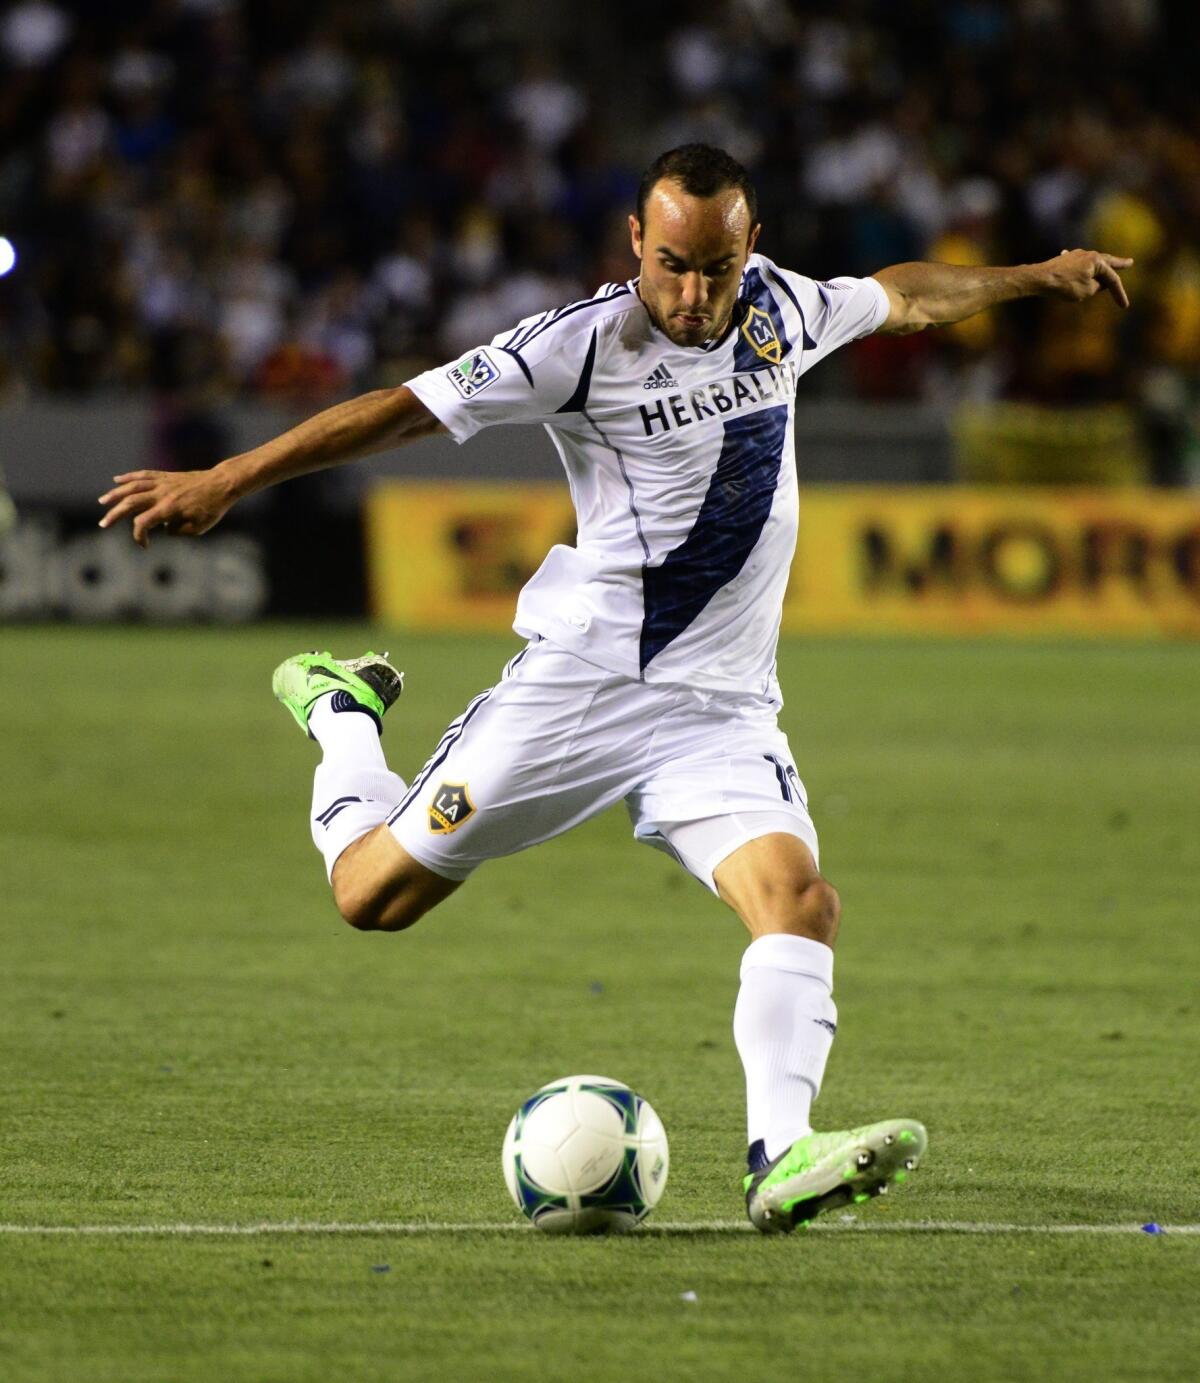 Landon Donovan and the L.A. Galaxy will join Real Madrid, Juventus and Everton FC as the first soccer teams to play in Dodger Stadium.